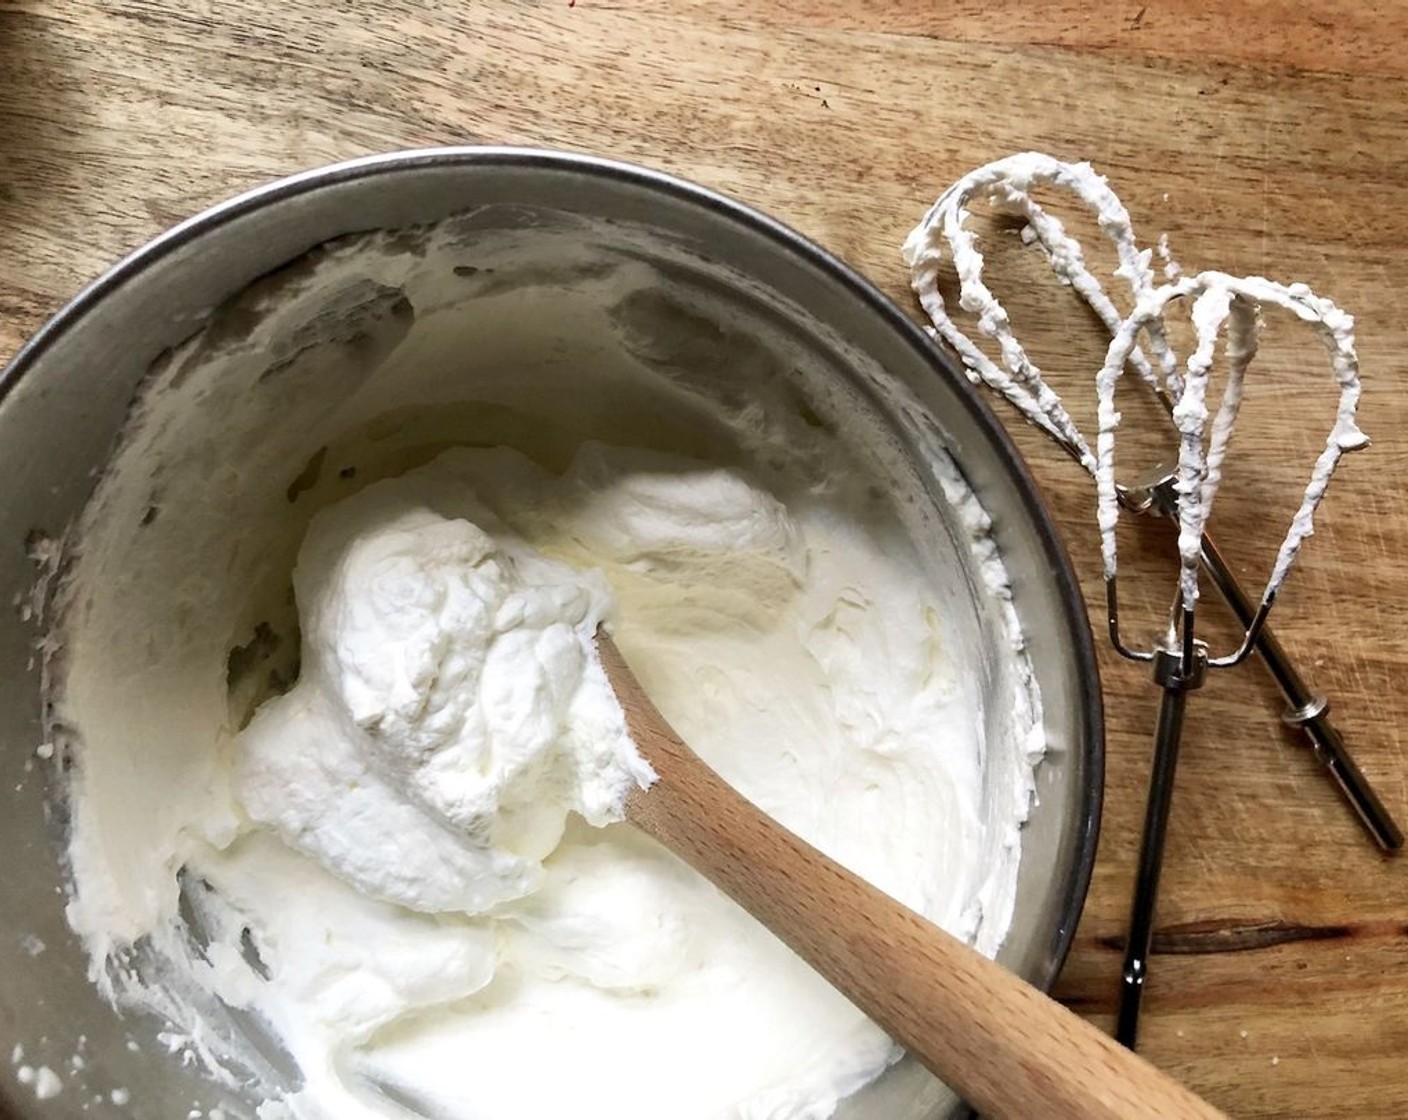 step 9 In a cold bowl, add the remaining Granulated Sugar (1 Tbsp) to the Whipping Cream (1 cup) Whisk or beat the cream to soft peaks.